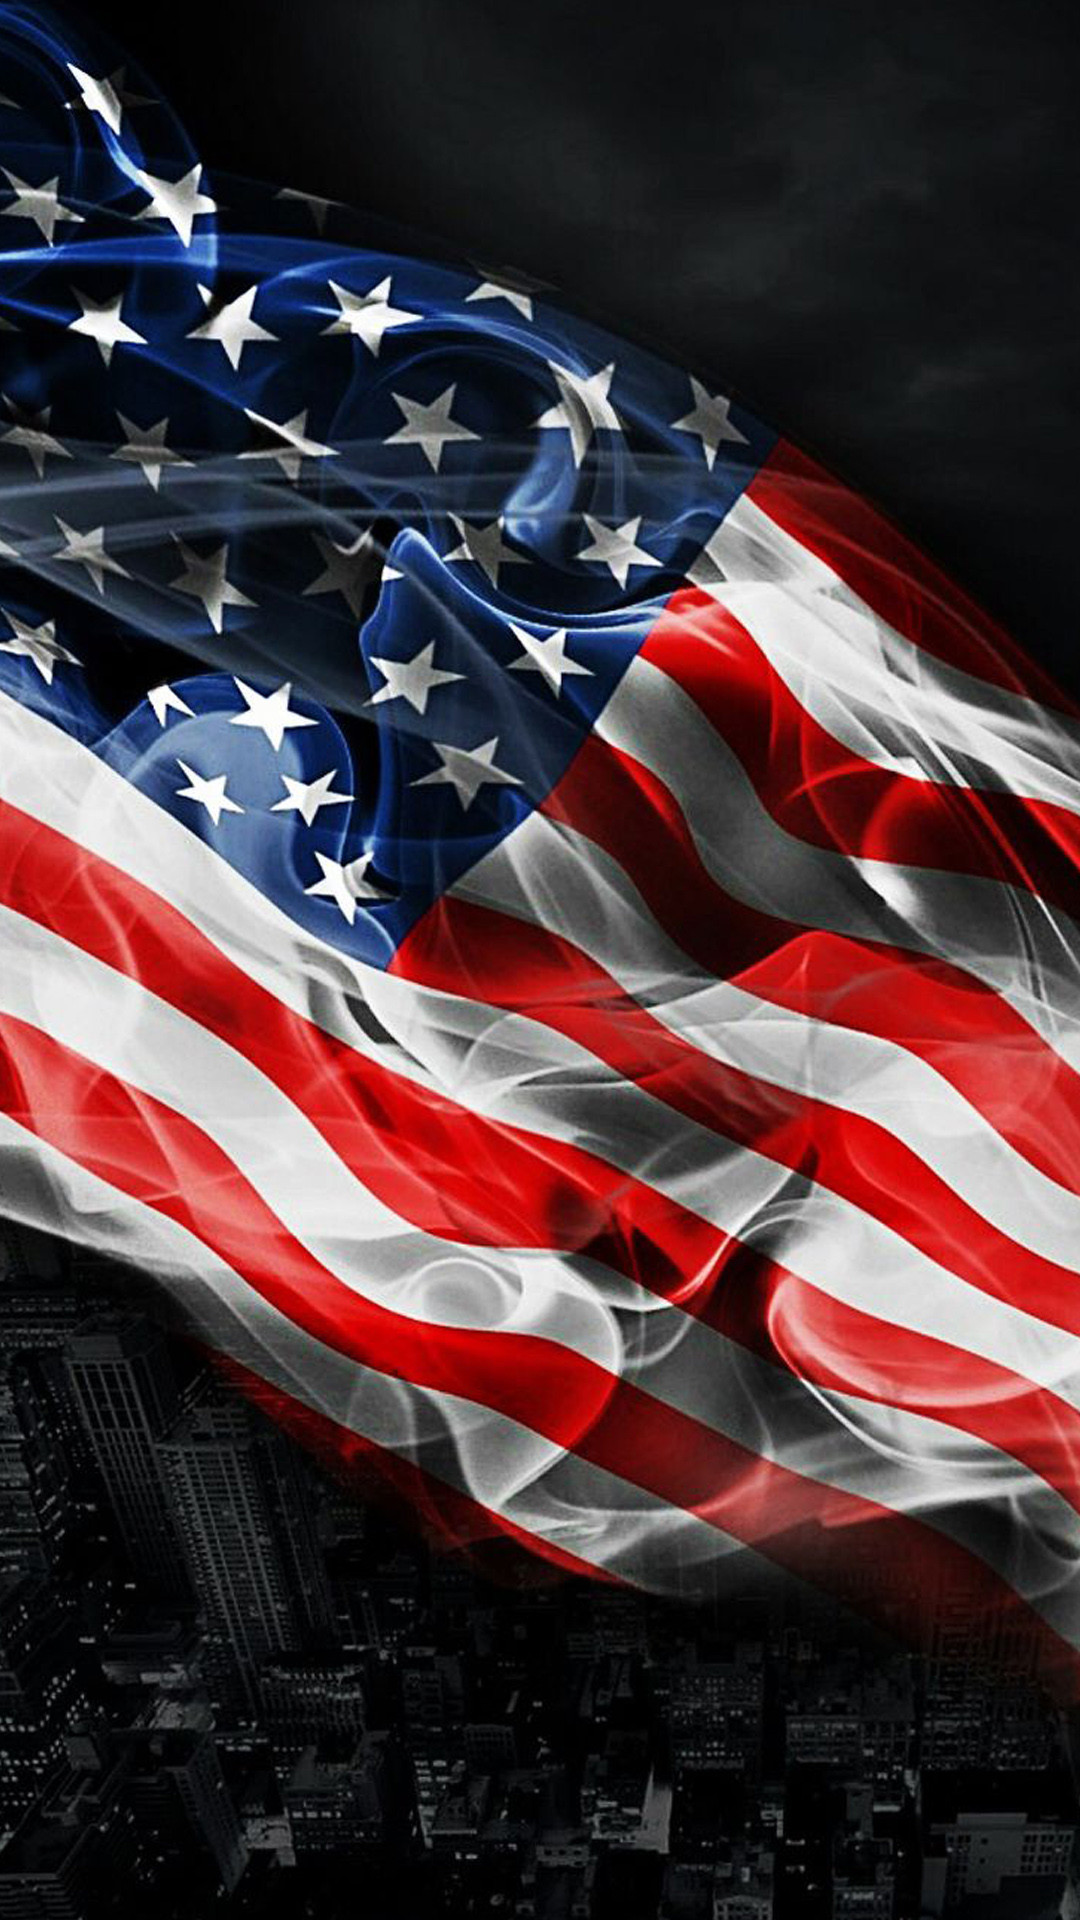 Patriotic Wallpapers and Screensavers (66+ images)